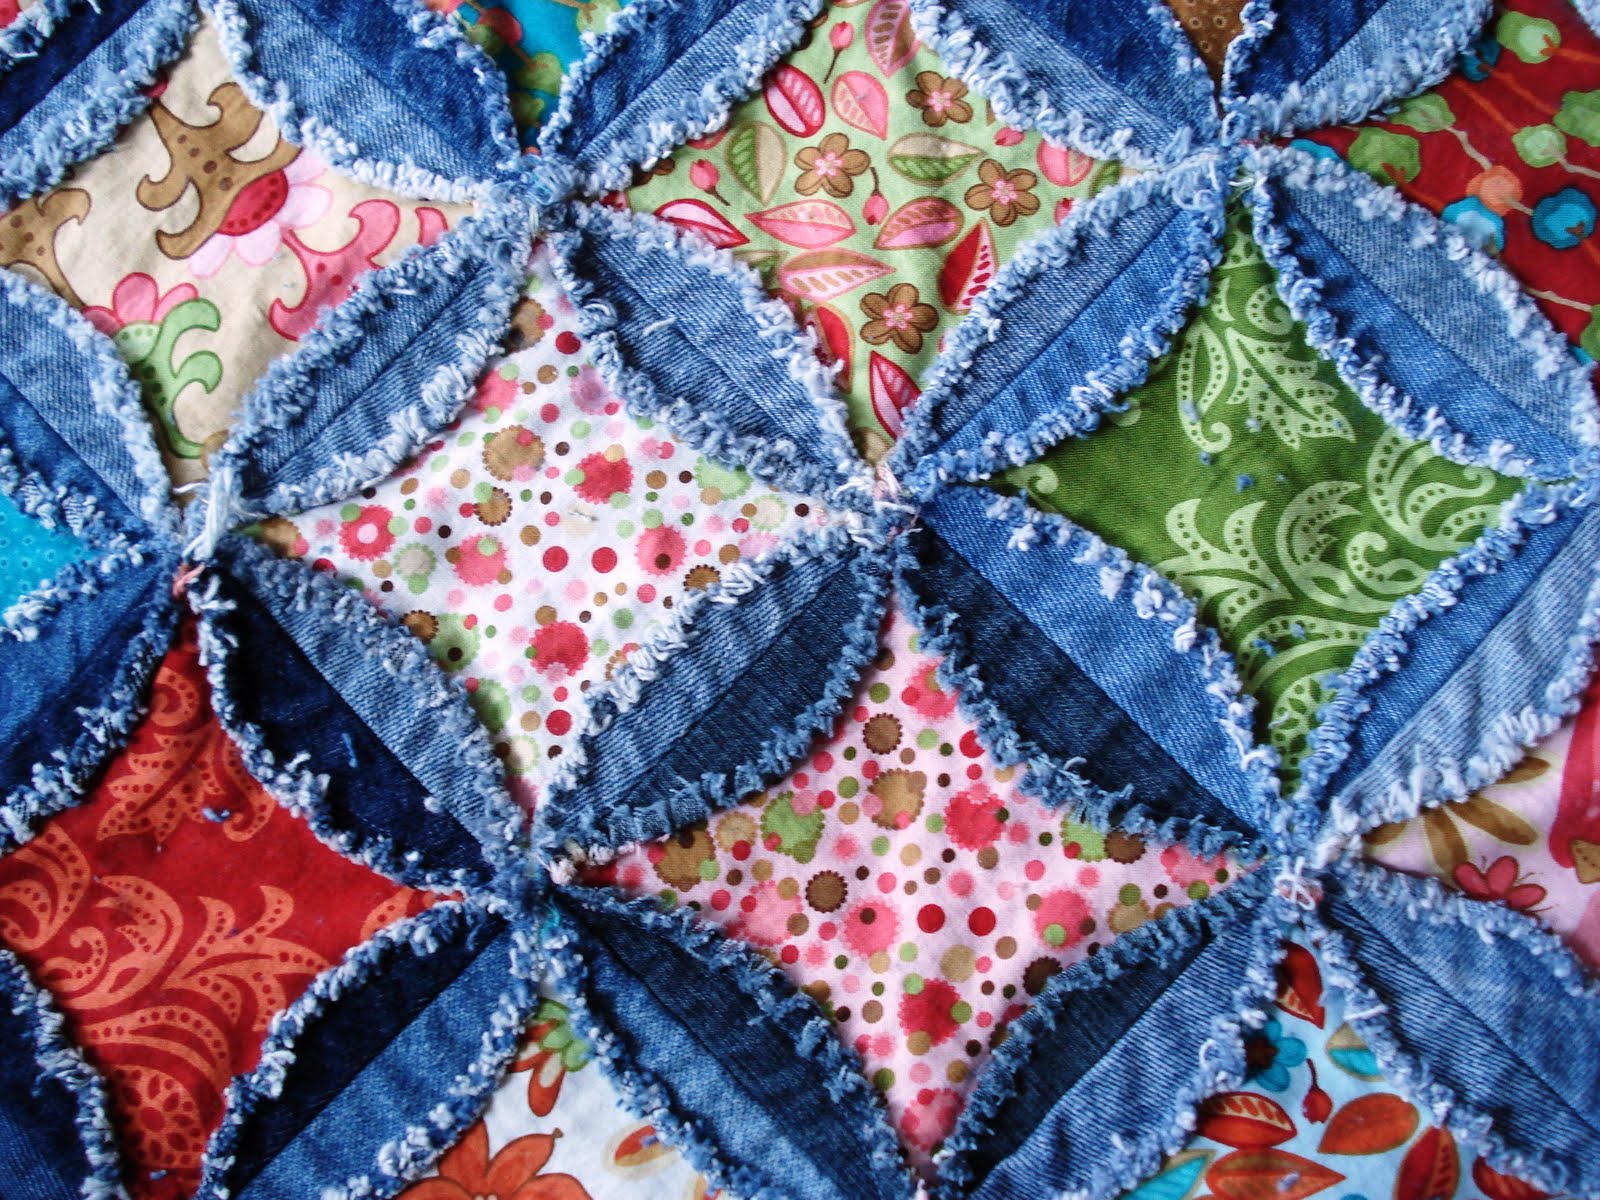 Passionate Quilter: Finished the Denim Quilt!